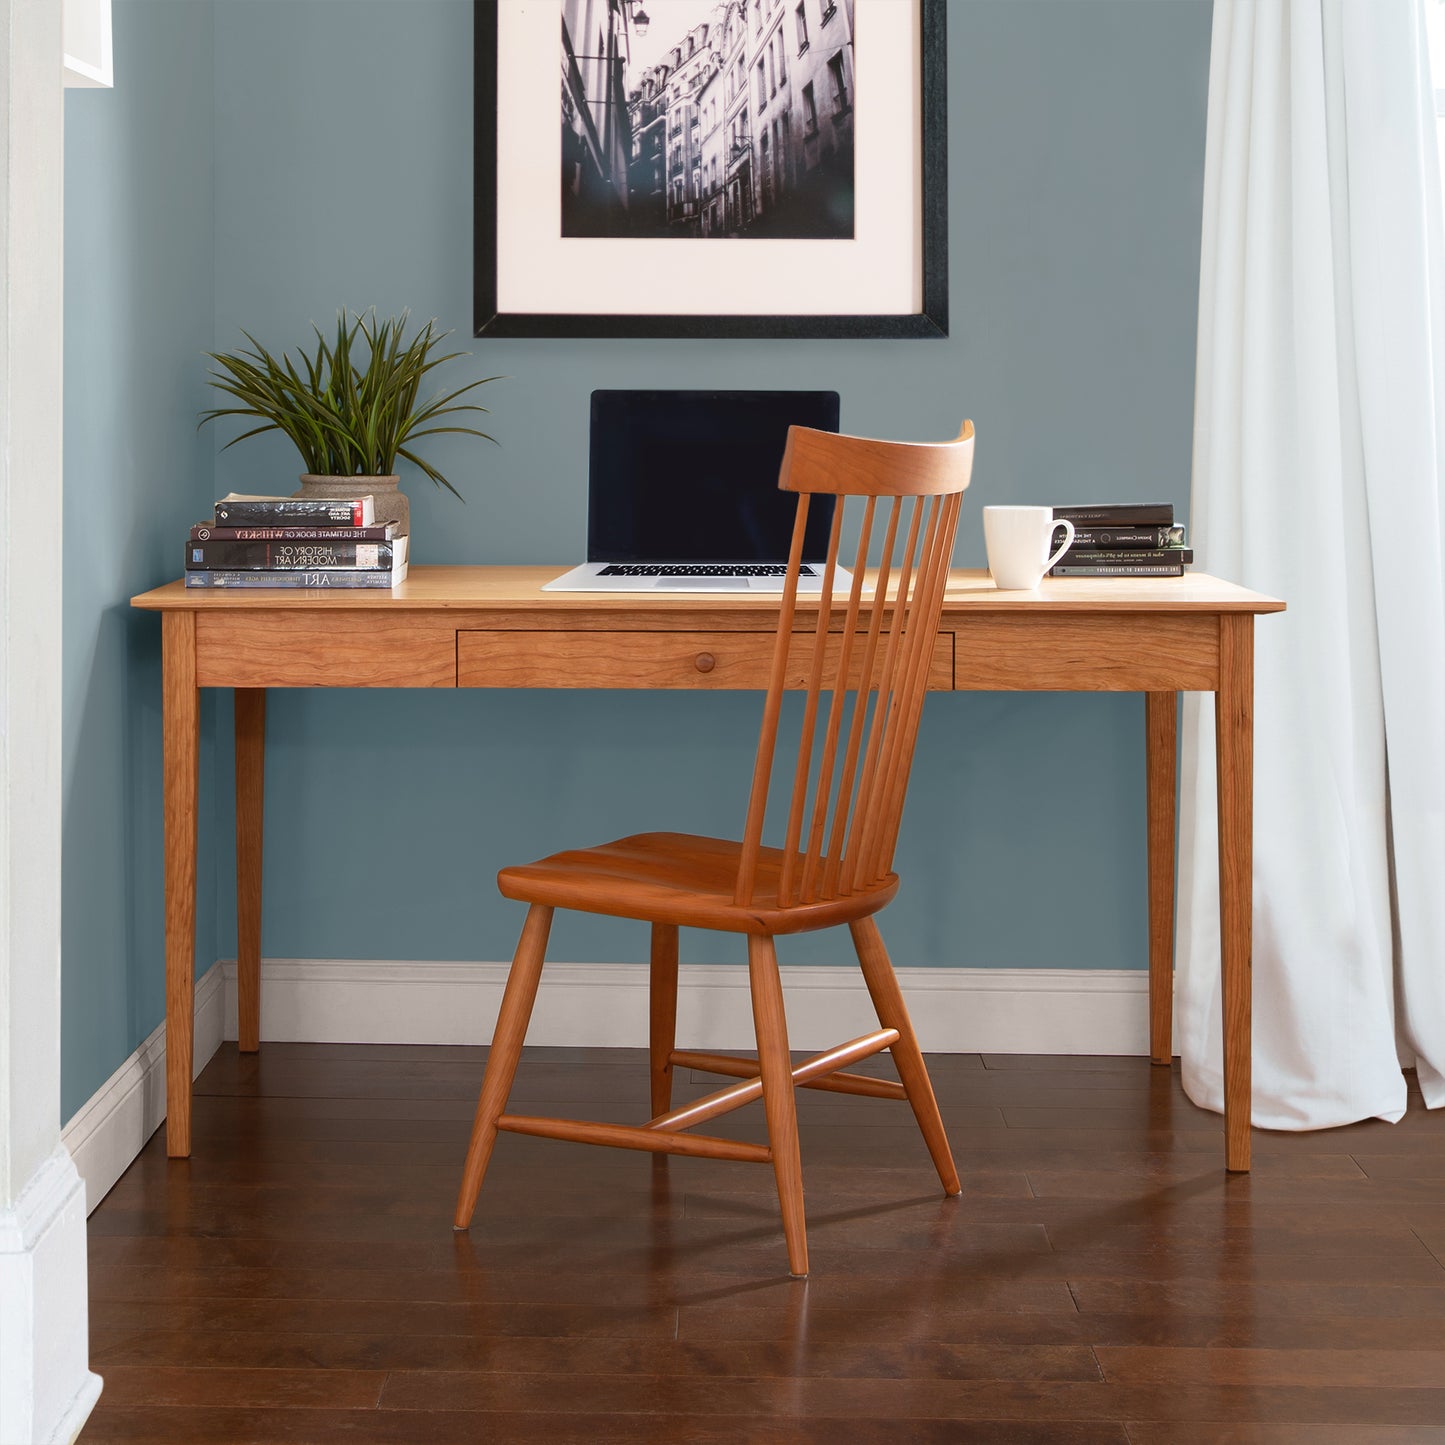 A tidy and minimalist work area with a Maple Corner Woodworks American Shaker Writing Desk, crafted by Vermont craftsmen from sustainably harvested hardwood, and chair against a teal wall, featuring a laptop, a small stack of